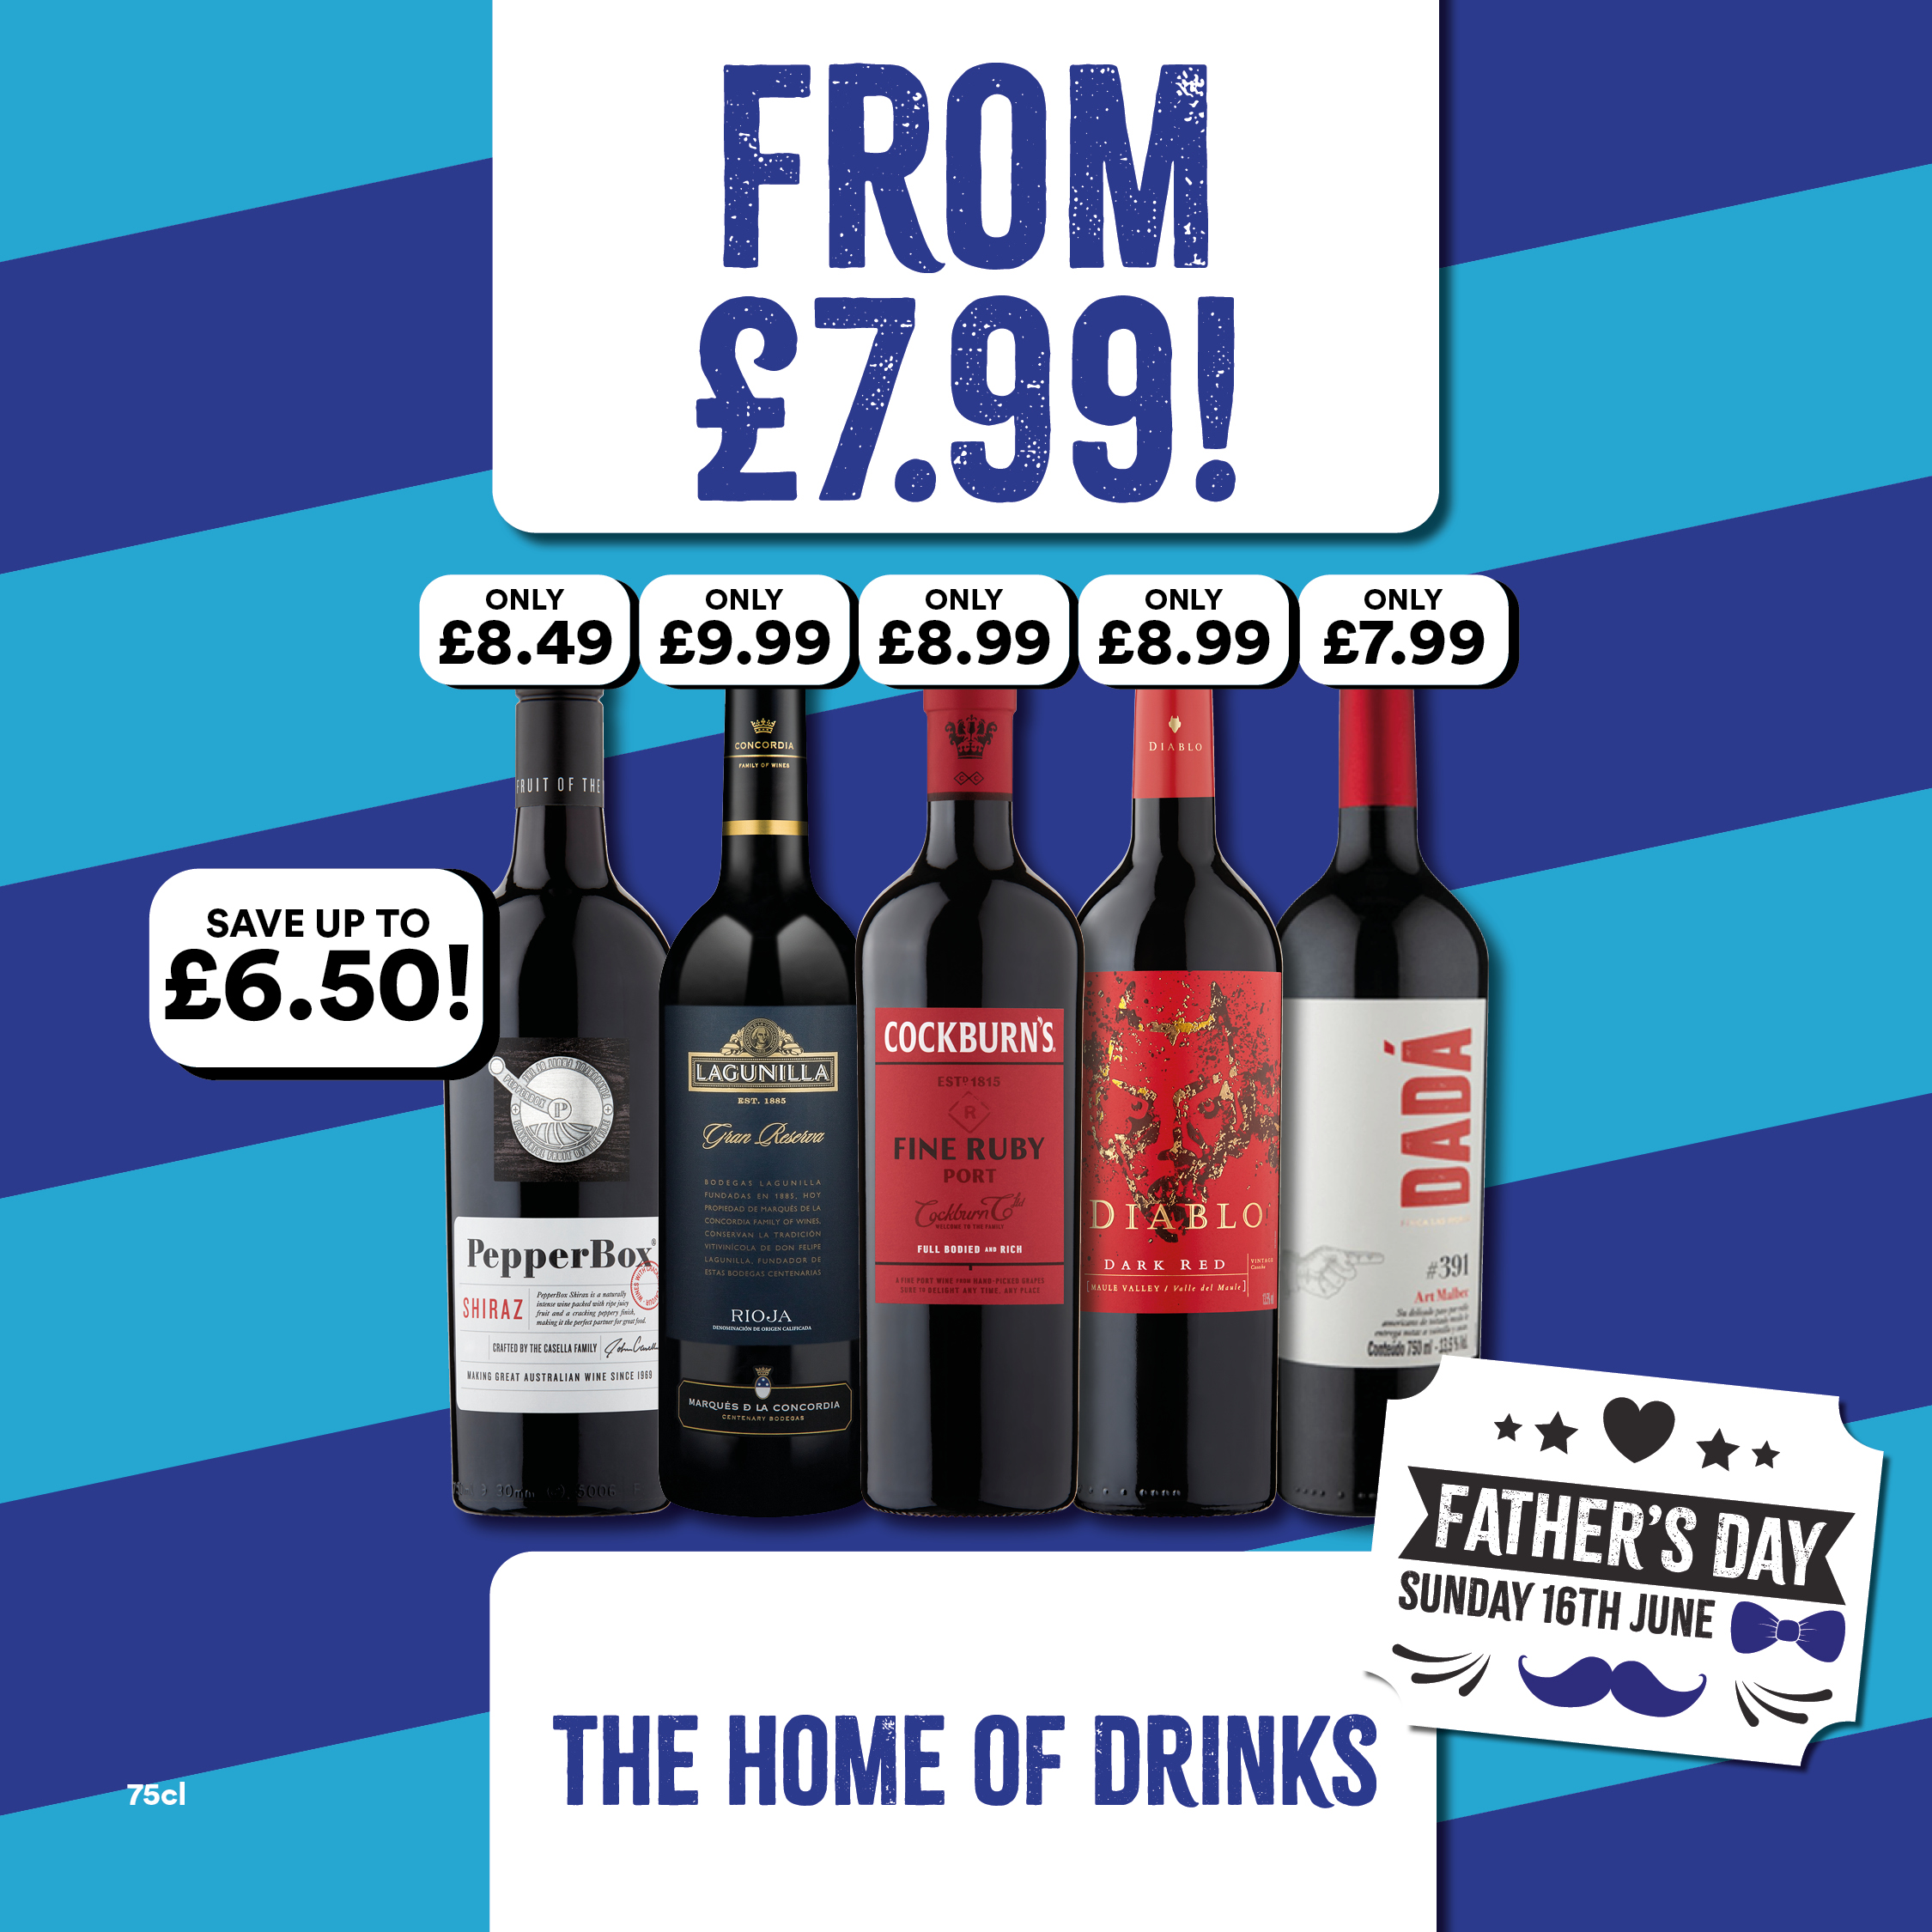 From £7.99 on selected wines Bargain Booze Sleaford 01529 307971